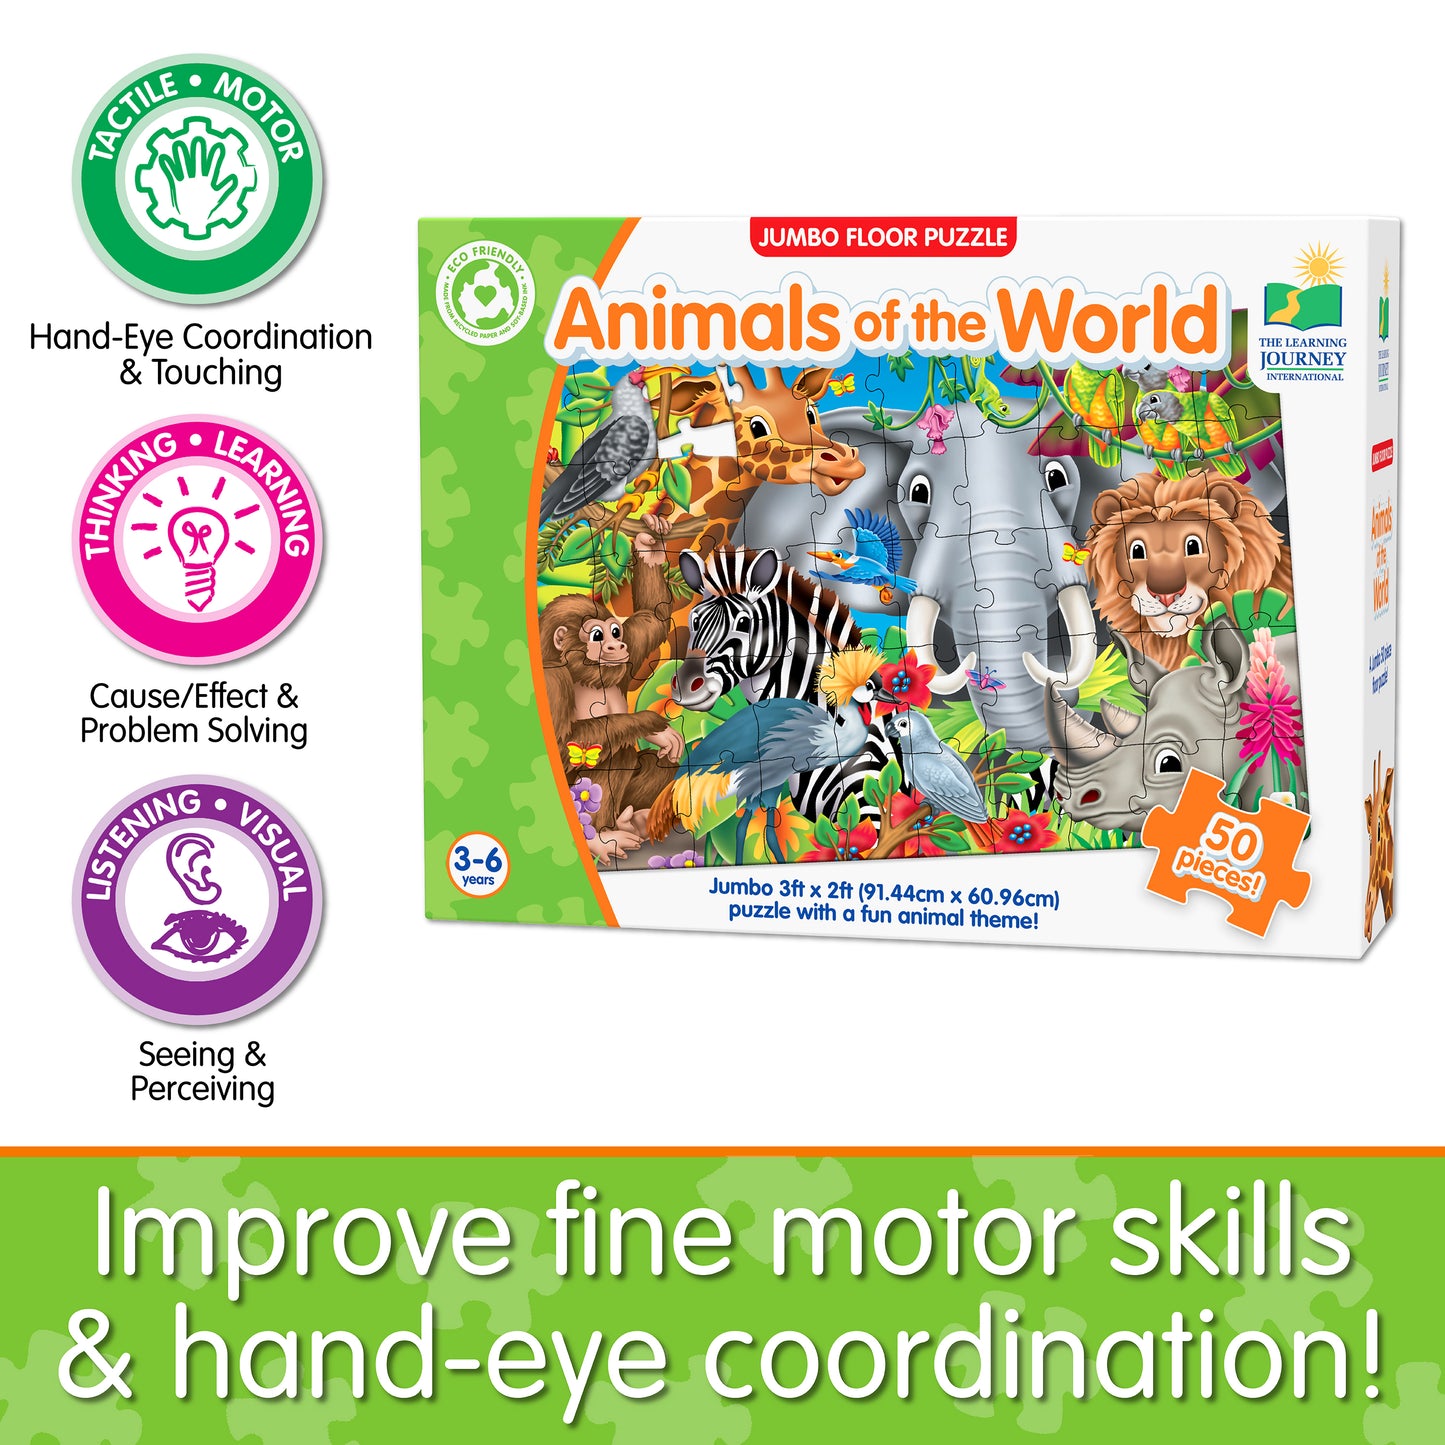 Infographic of Jumbo Floor Puzzle - Animals of the World's educational benefits that reads, "Improve fine motor skills and hand-eye coordination!"